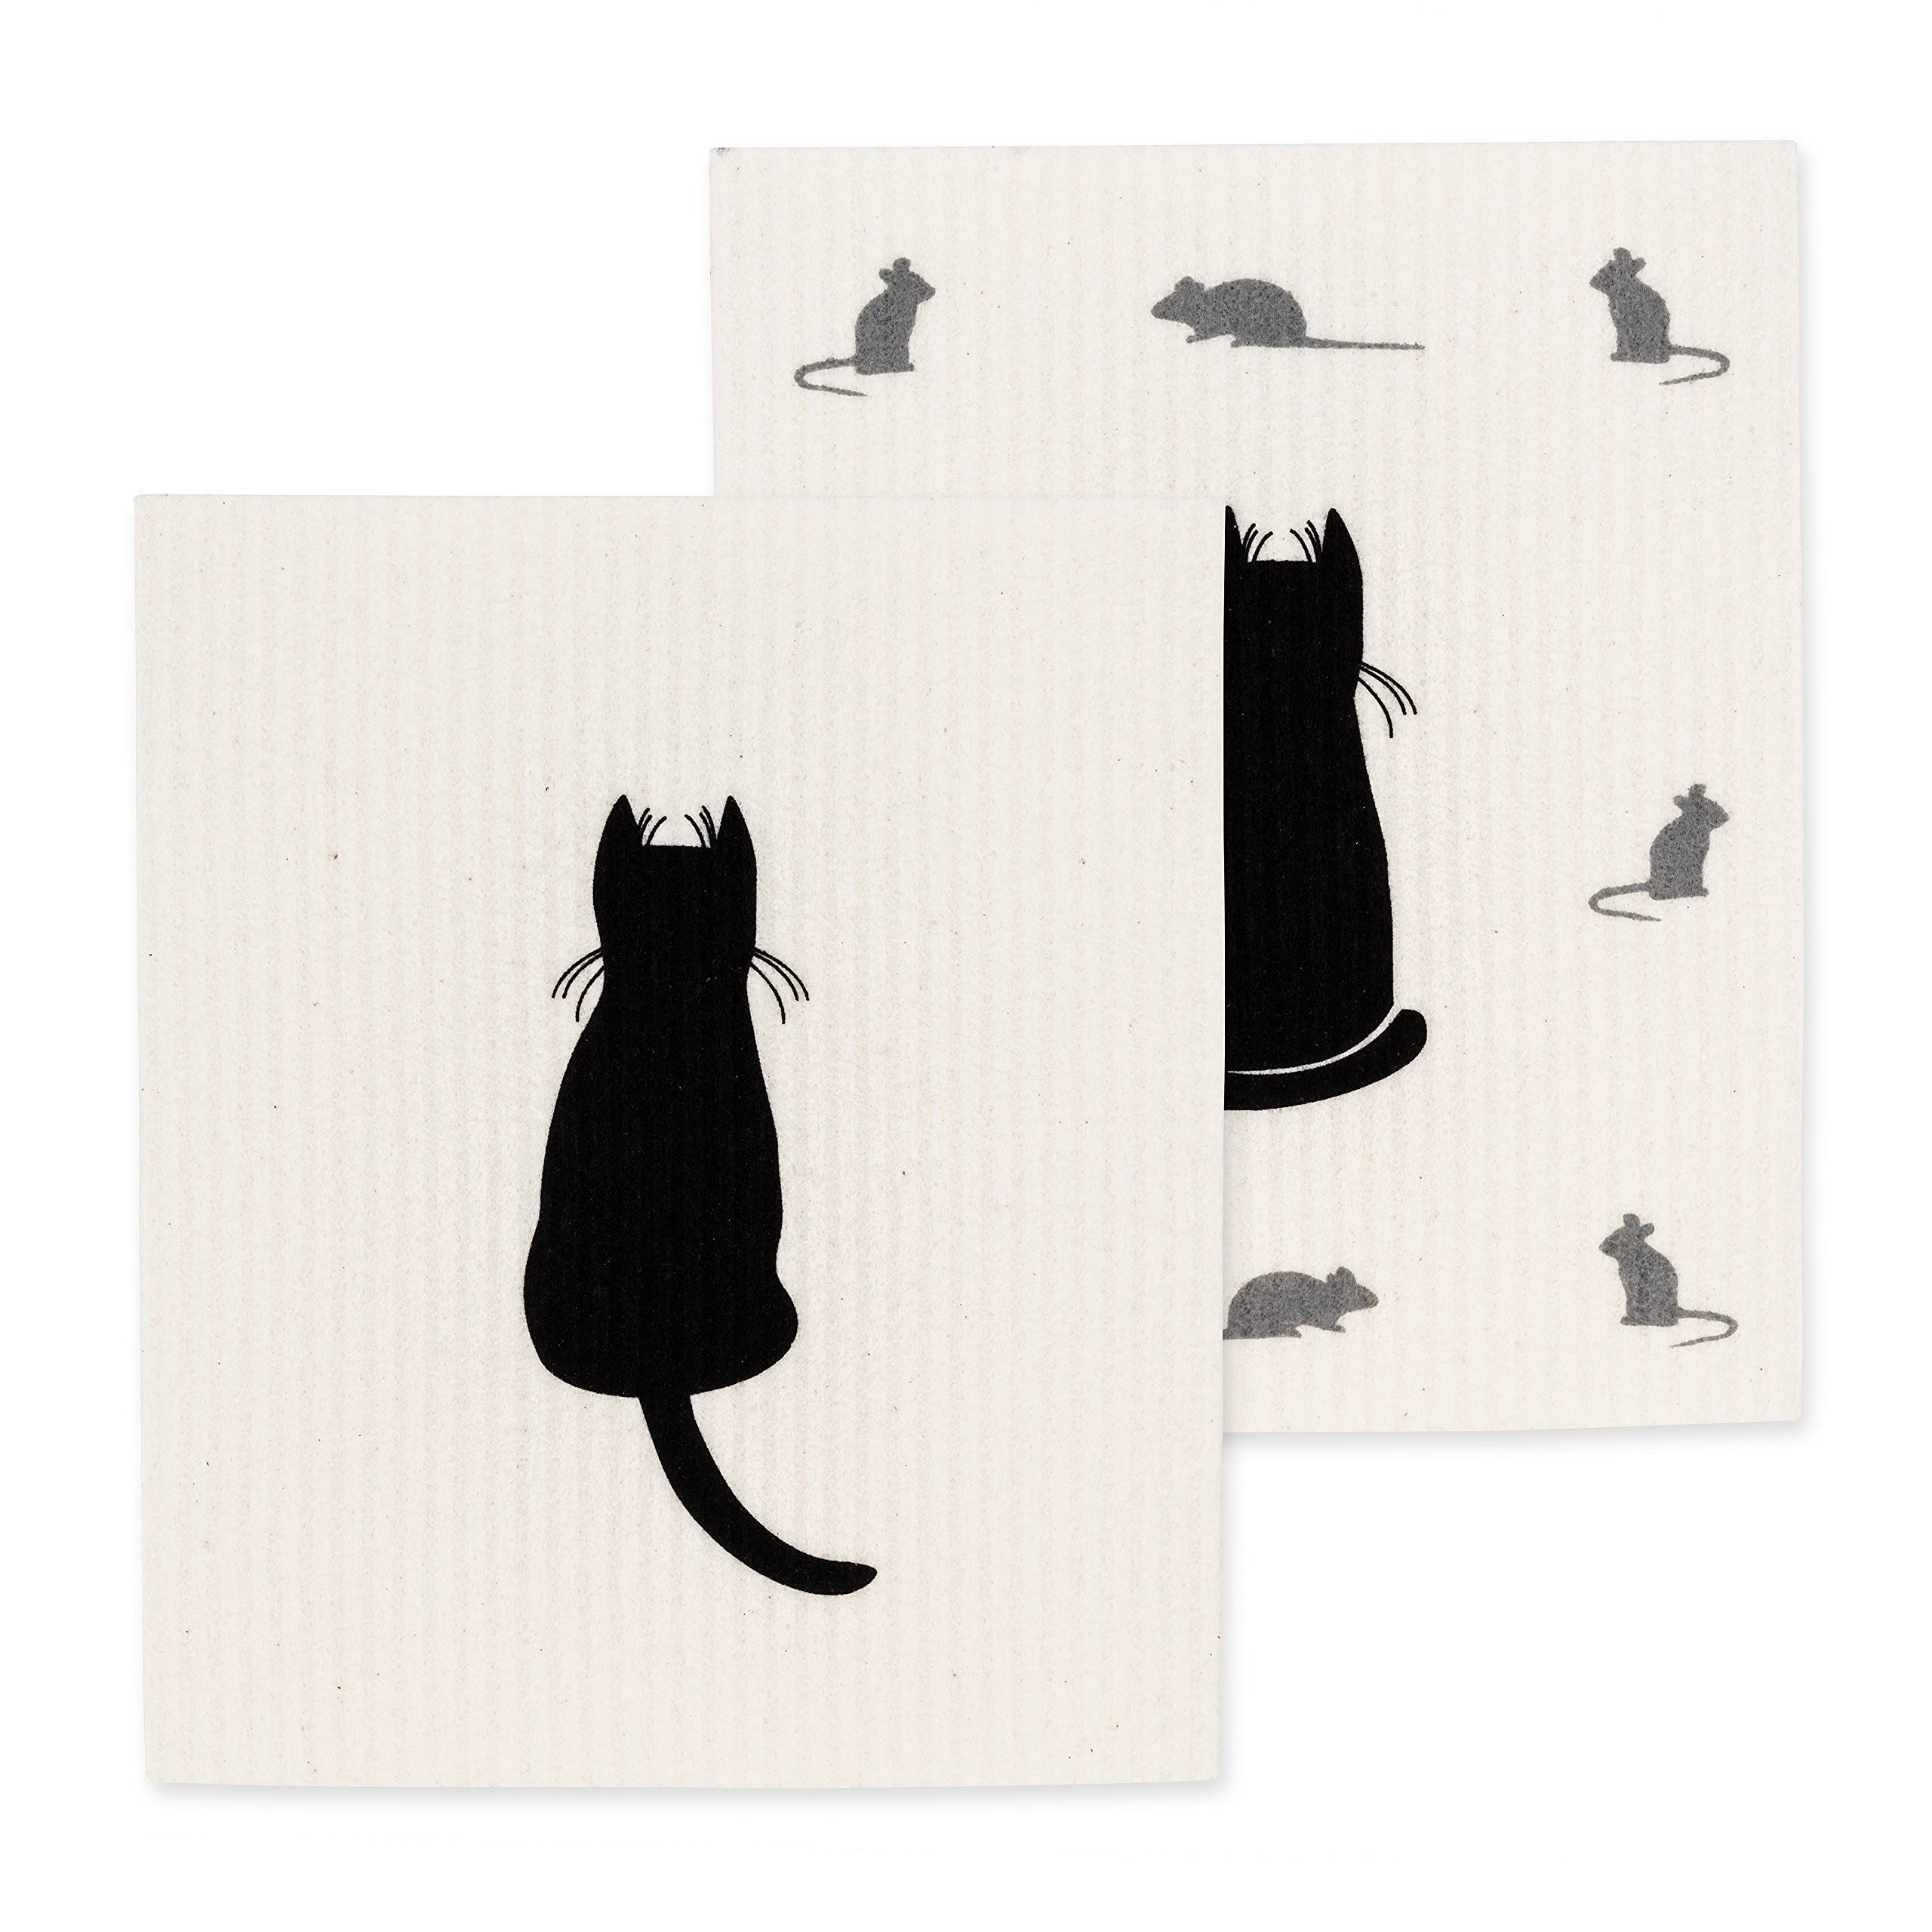 Abbott Collections AB-84-ASD-AB-08 6.5 x 8 in. Cat & Mice Dishcloths, Ivory & Black - Set of 2